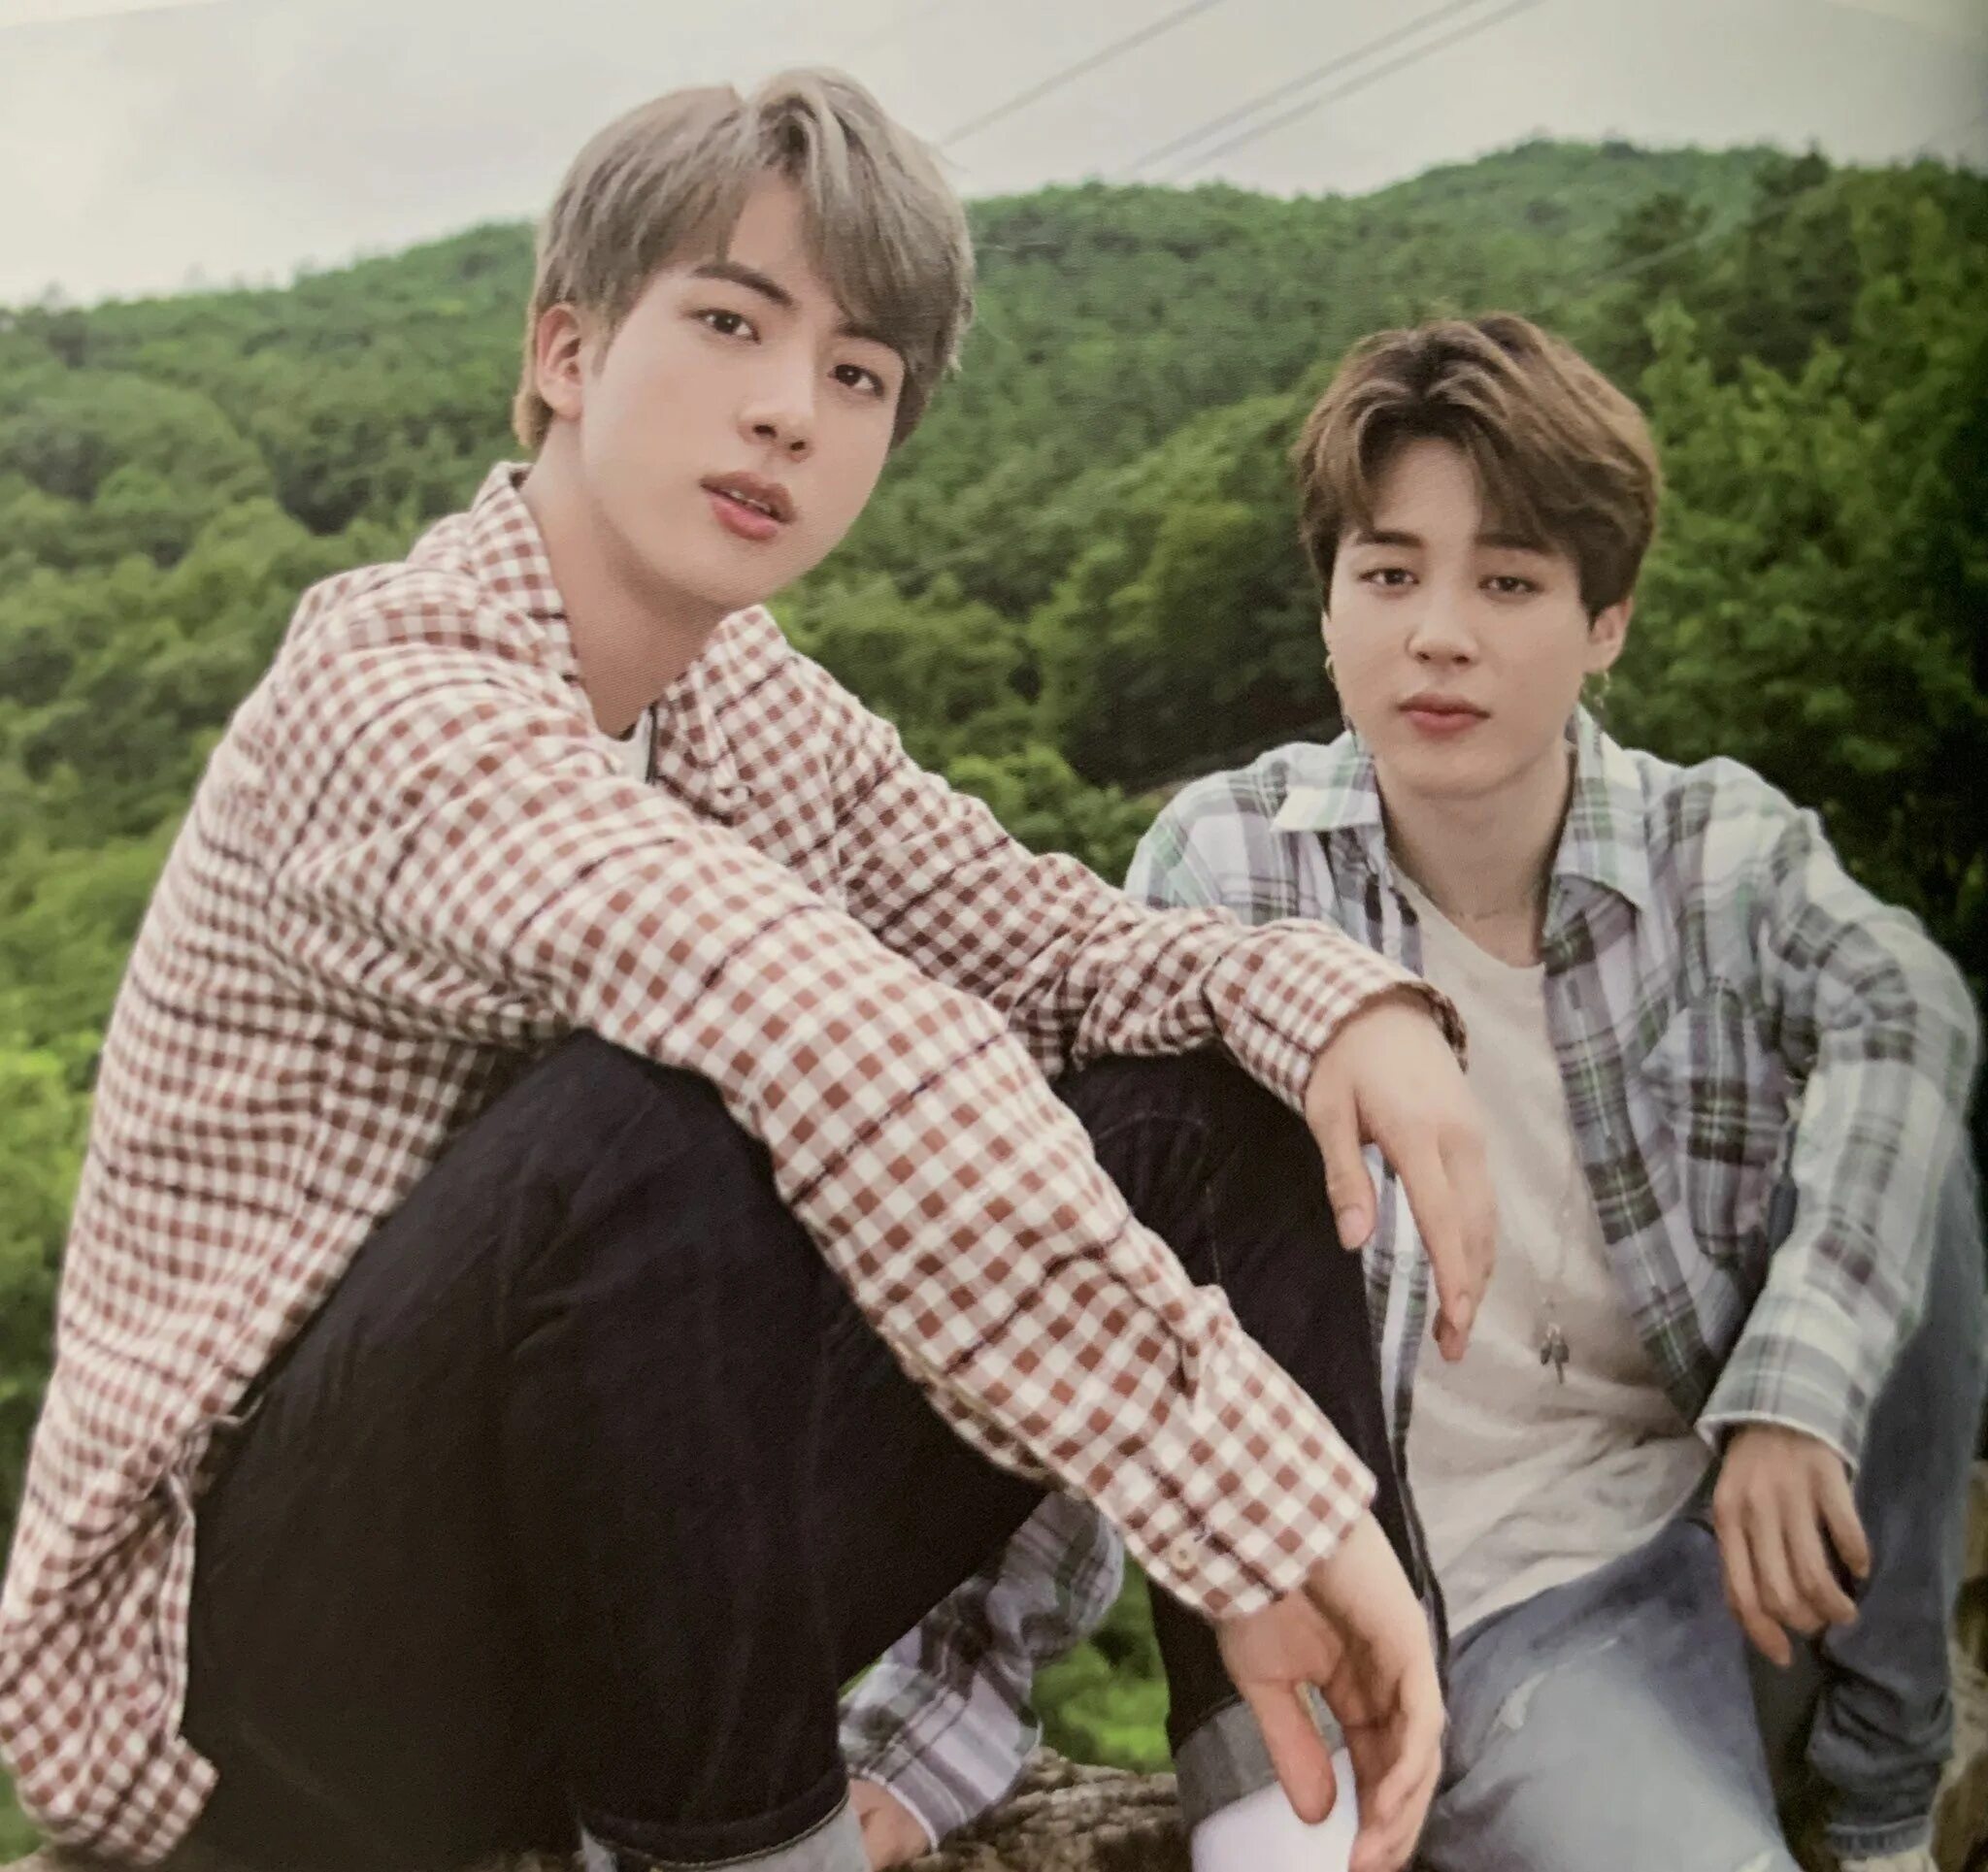 БТС Summer package 2019. BTS Jin and Jimin. BTS Jin Jimin Jungkook. Jin BTS Summer package 2019.